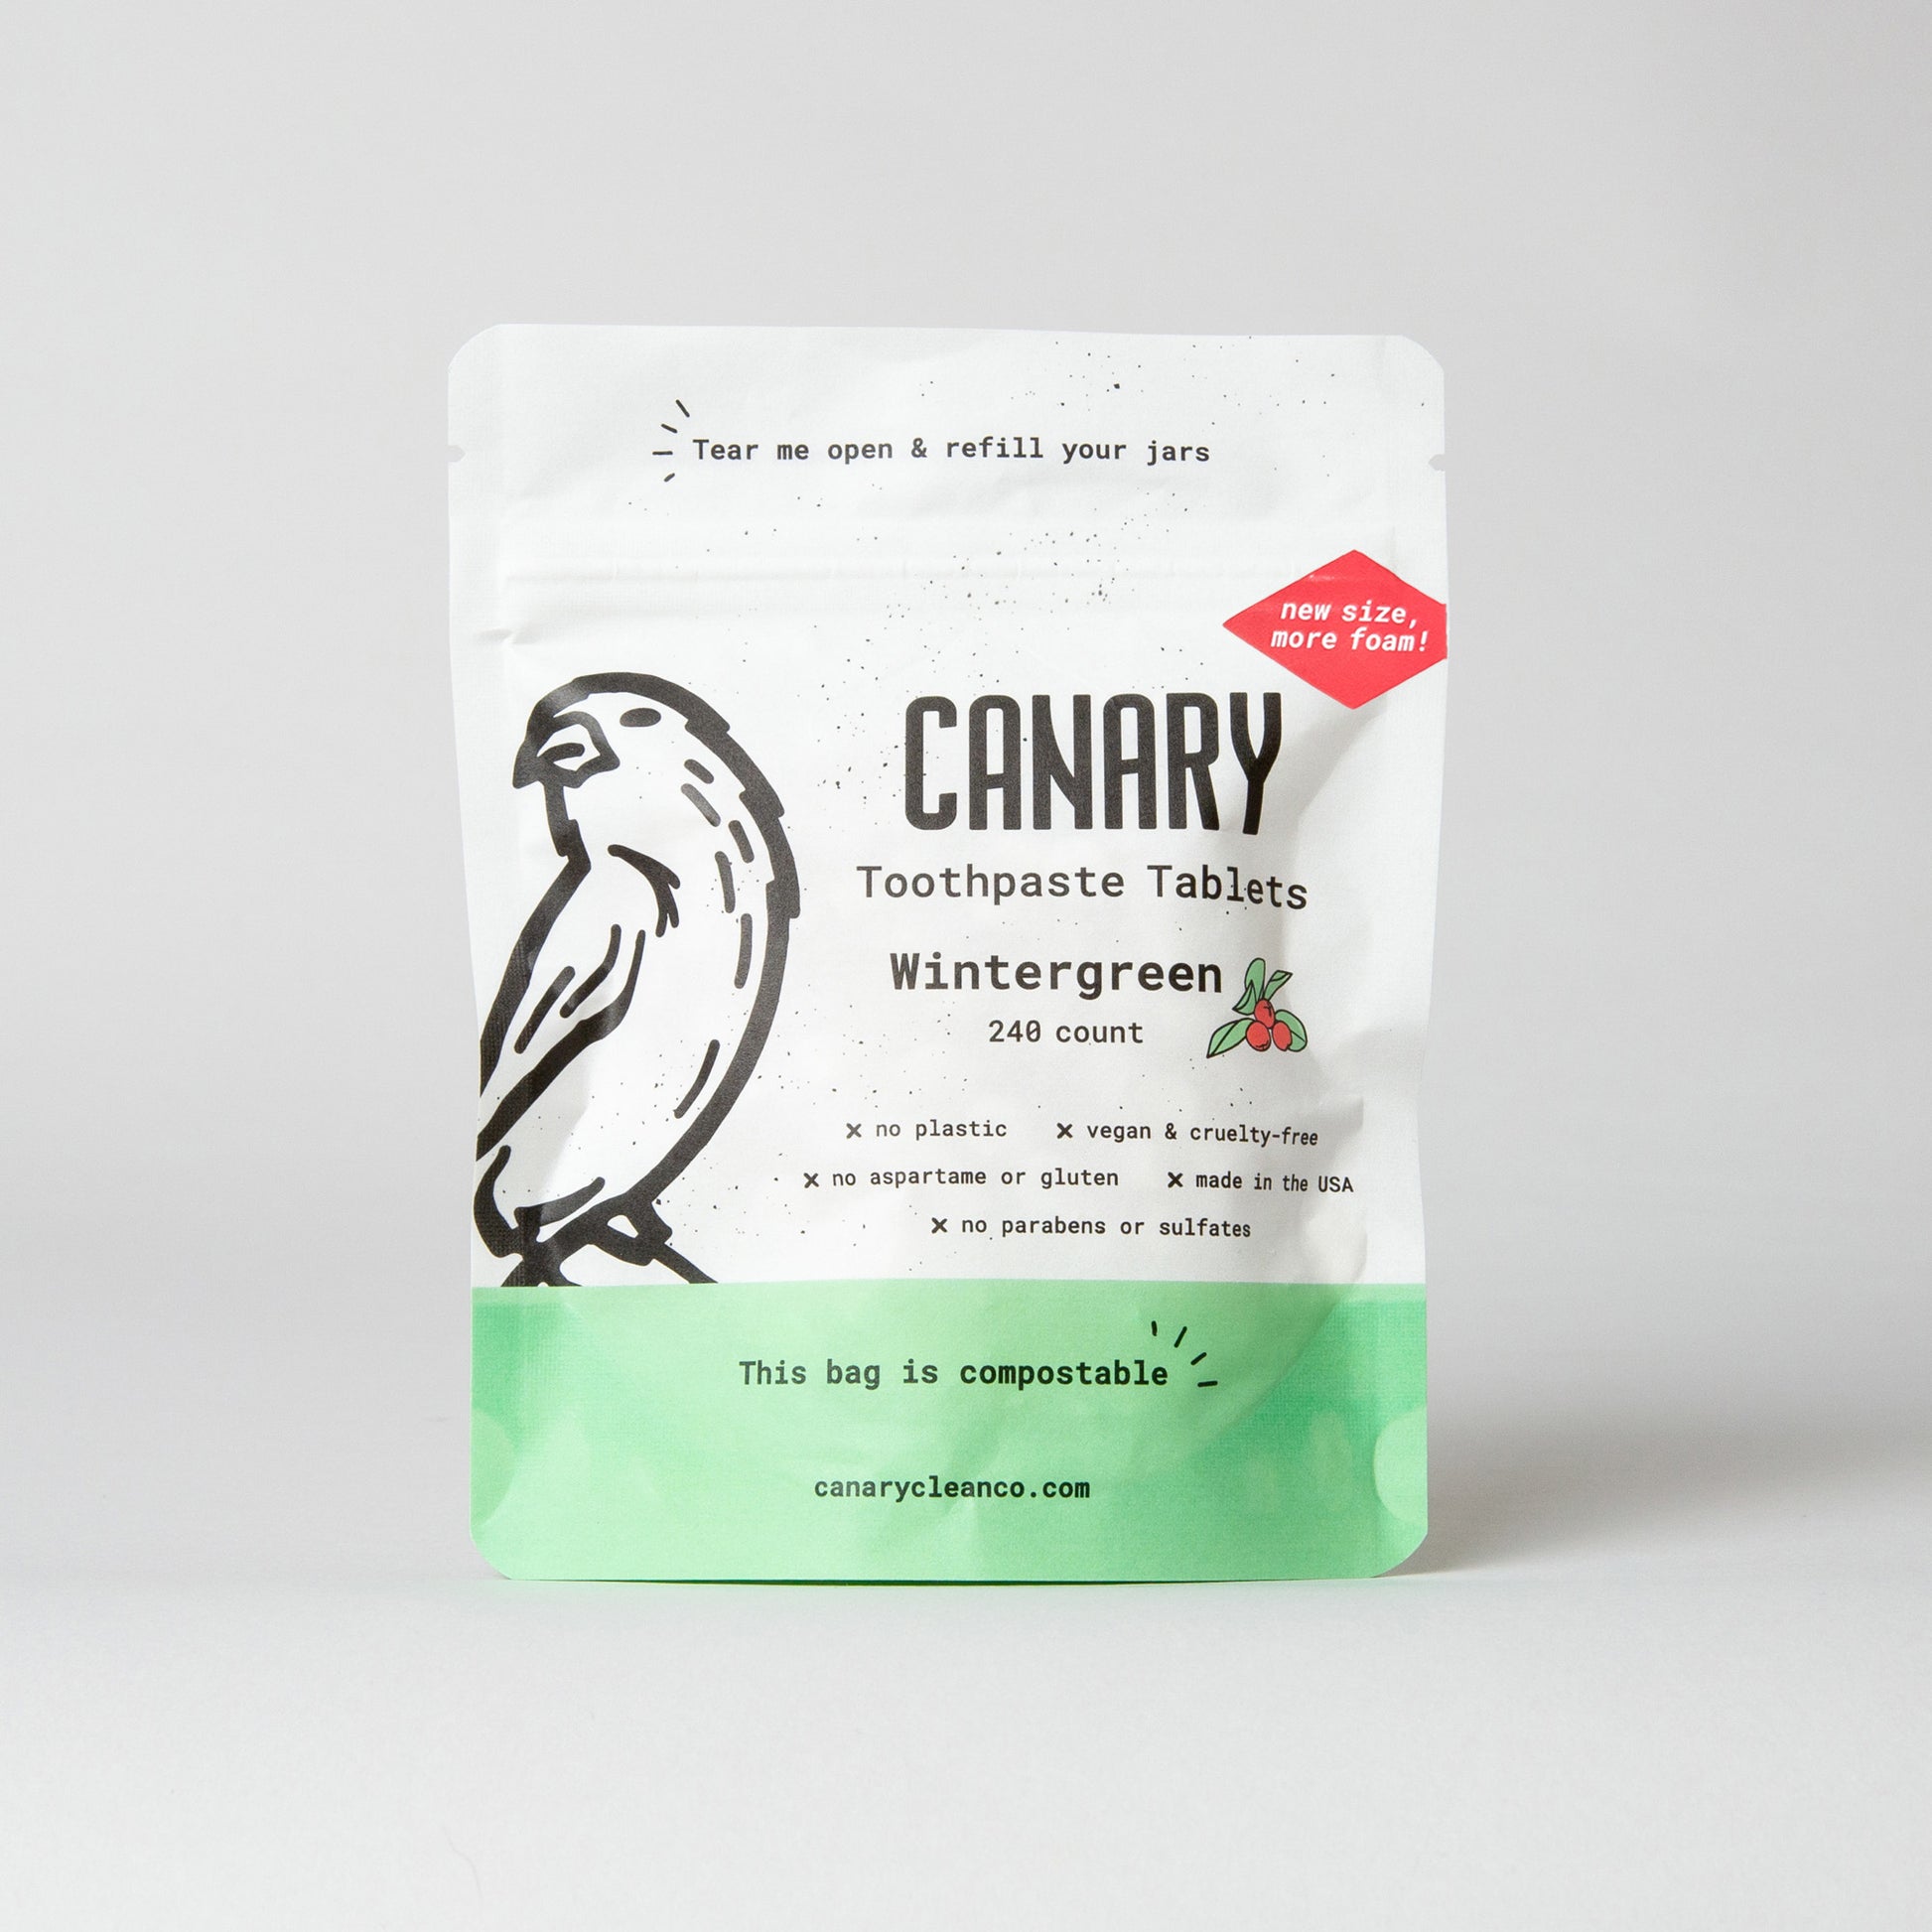 New and Improved Canary Wintergreen Toothpaste Tablets, 240 count compostable pouch, front view of the pouch